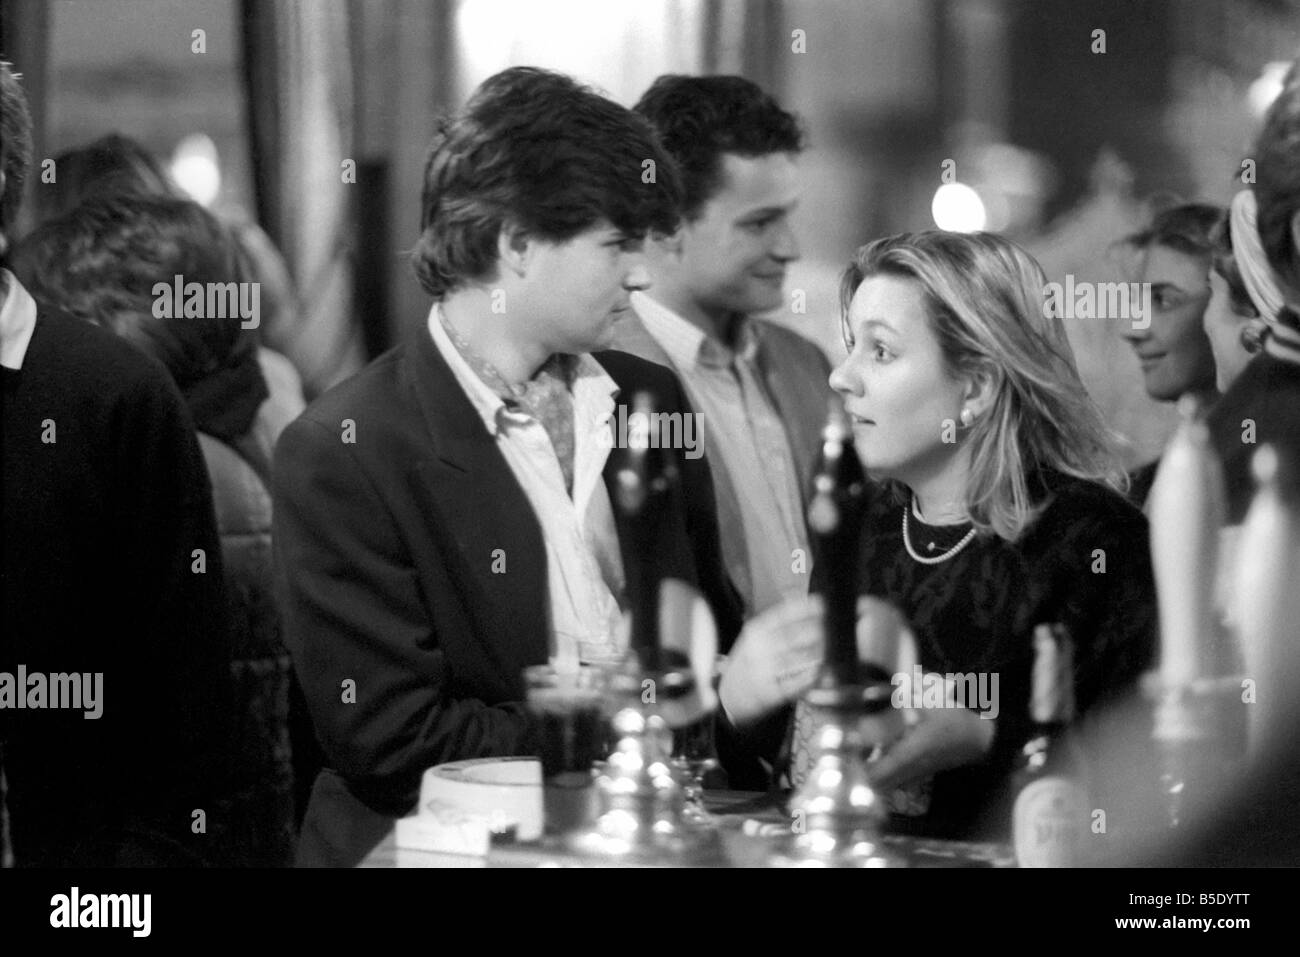 Drinkers in an East End Pub enjoying a pint of beer. March 1987 Stock Photo